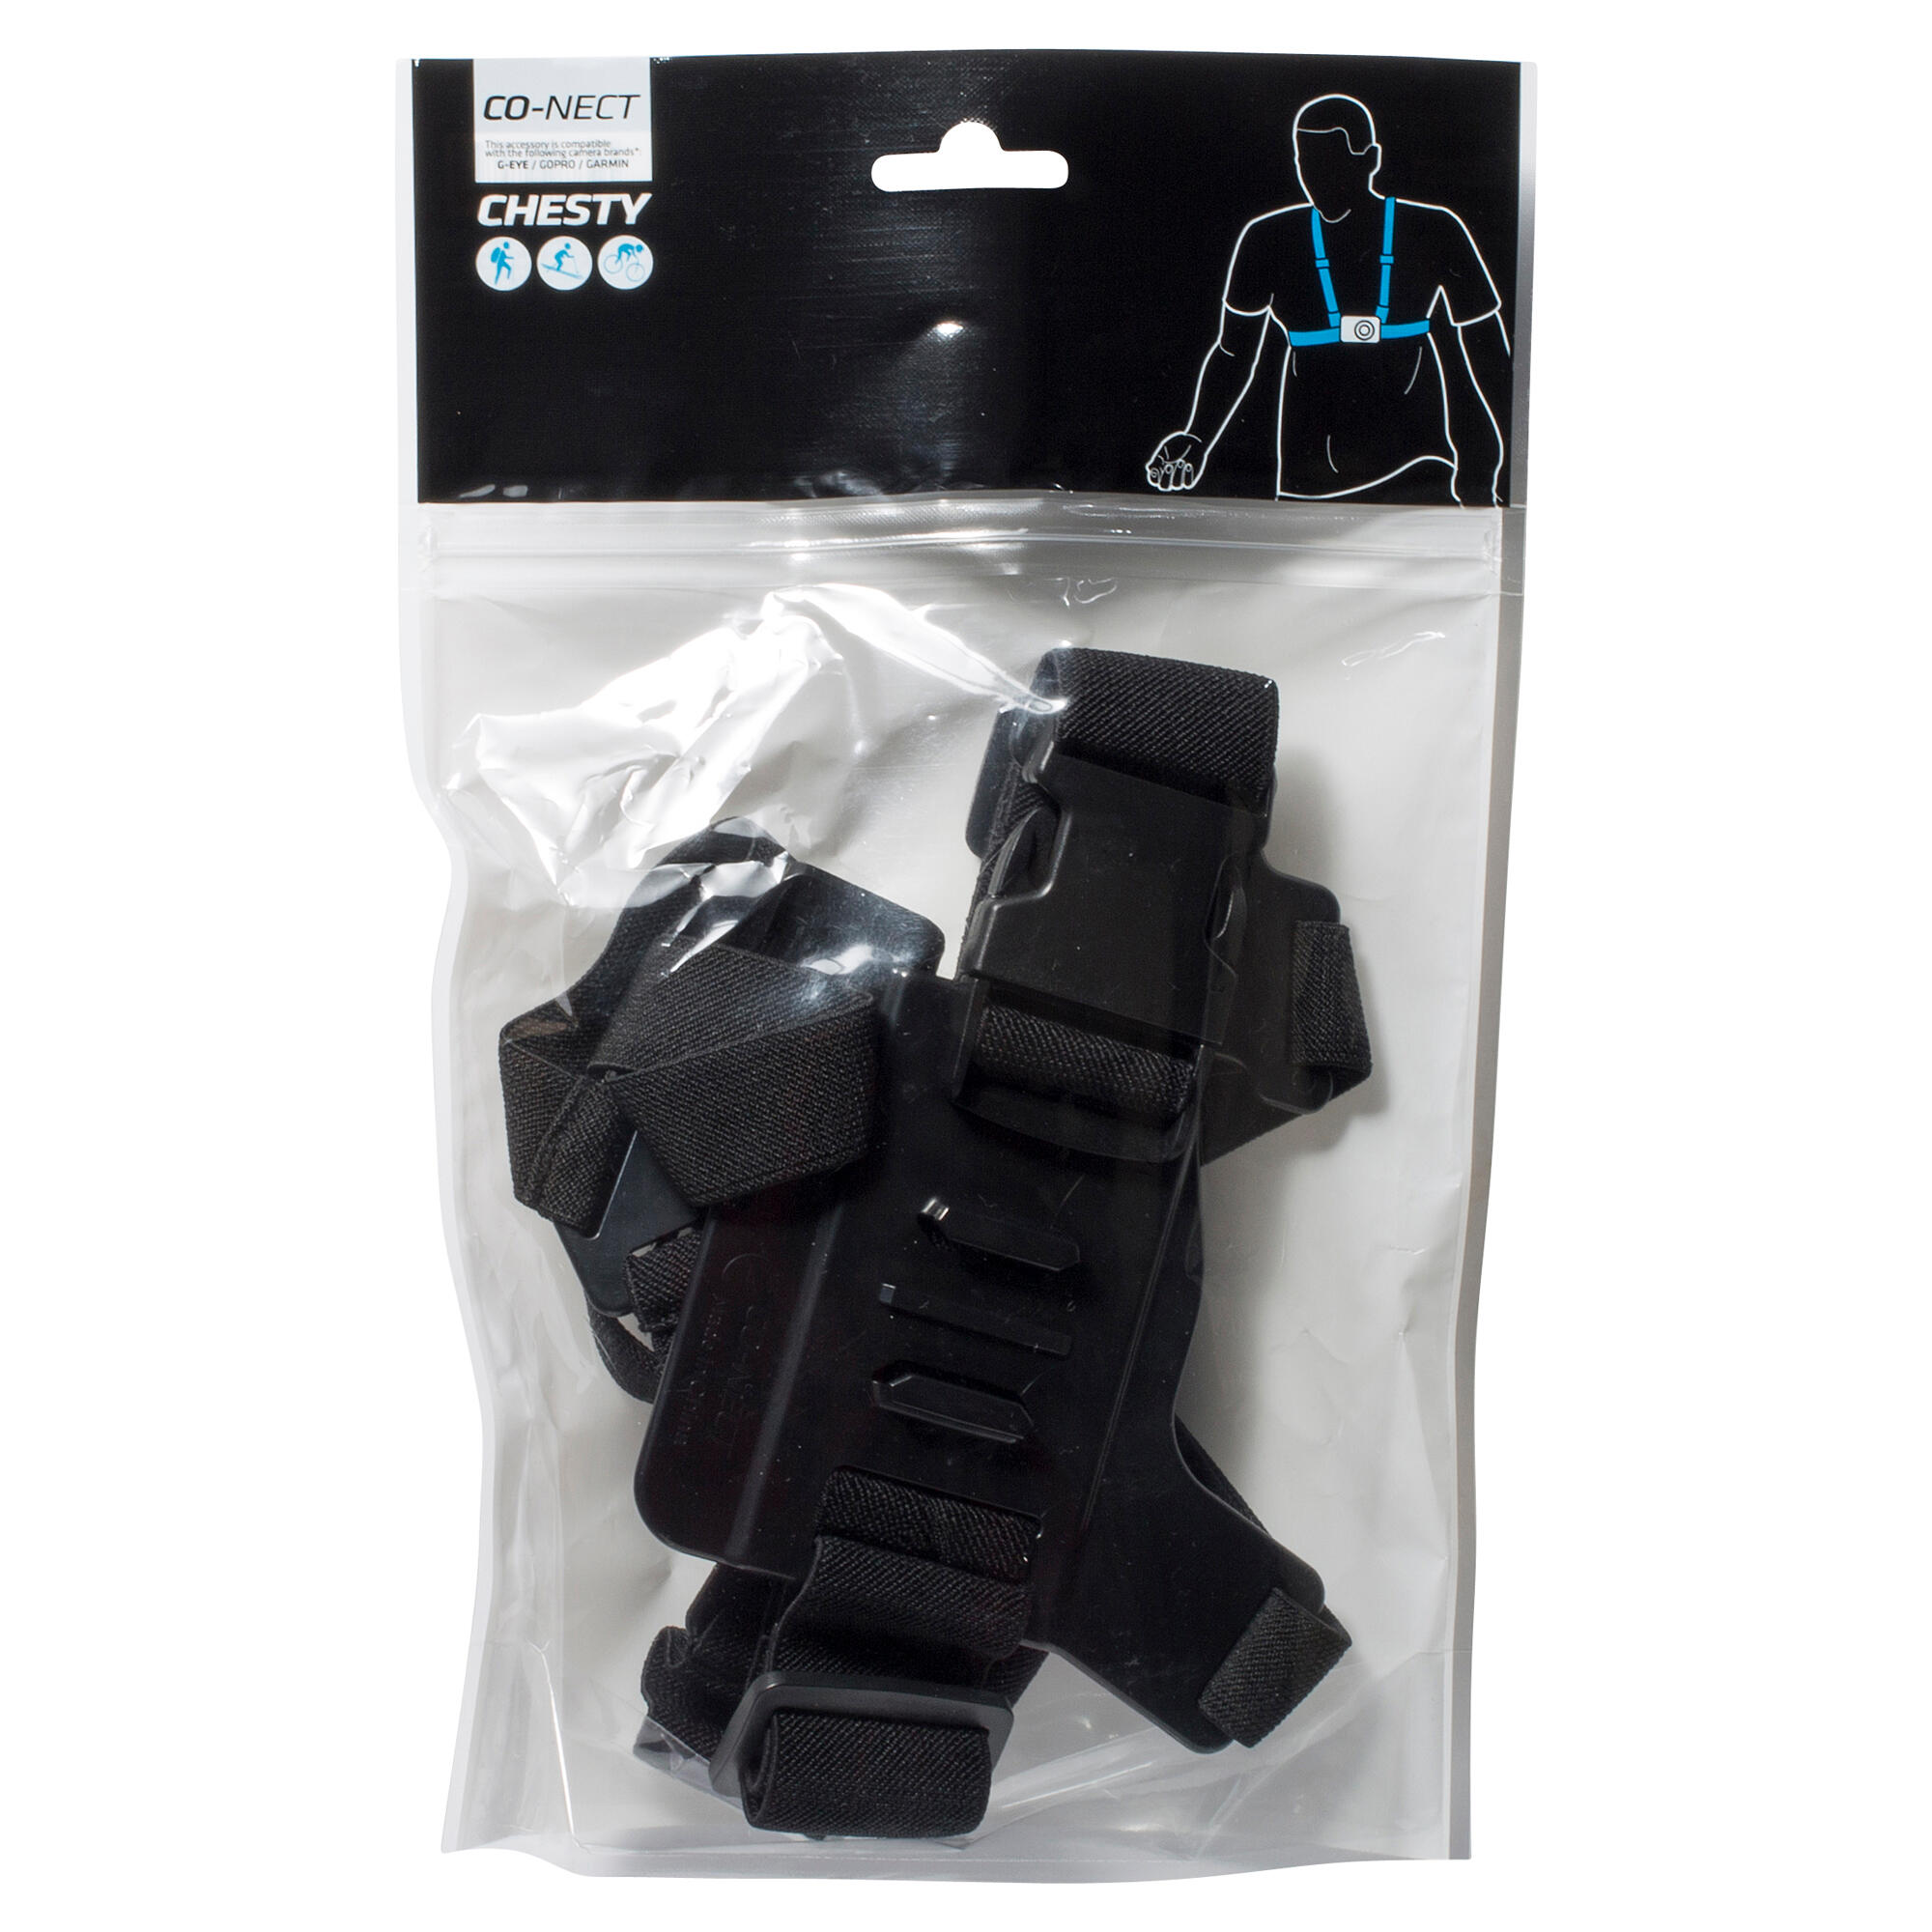 ROCKRIDER CHESTY CO-NECT Chest Harness for Sports Cameras